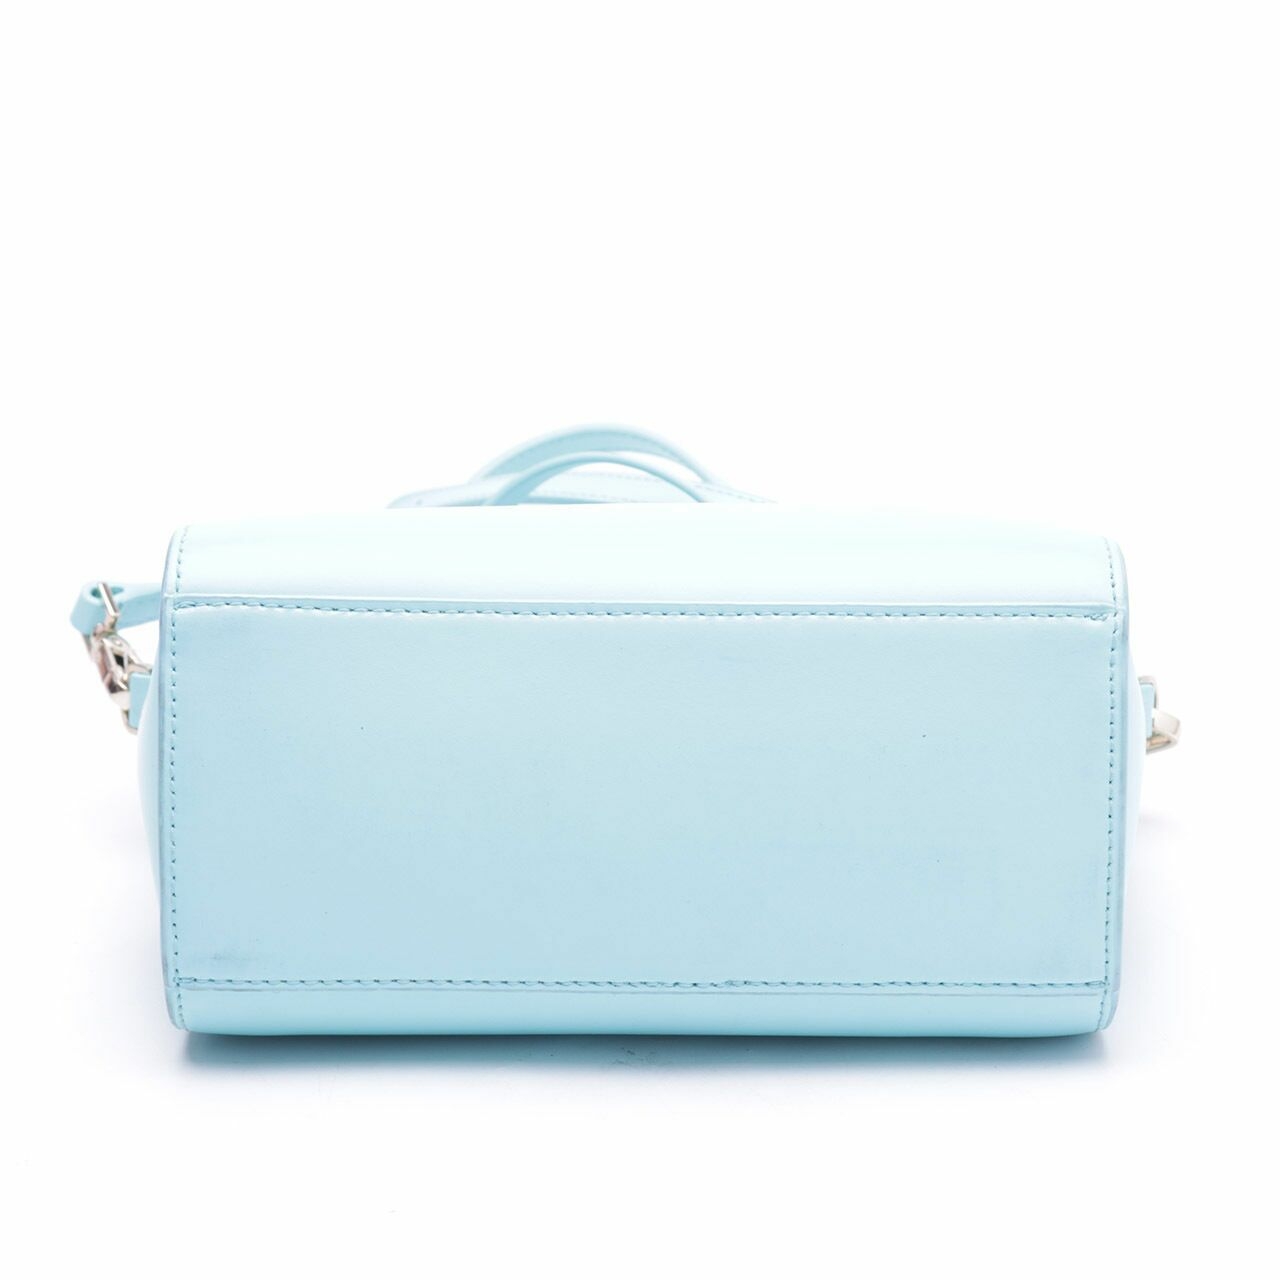 Kate Spade New York Blue Lily Avenue Scalloped Satchel